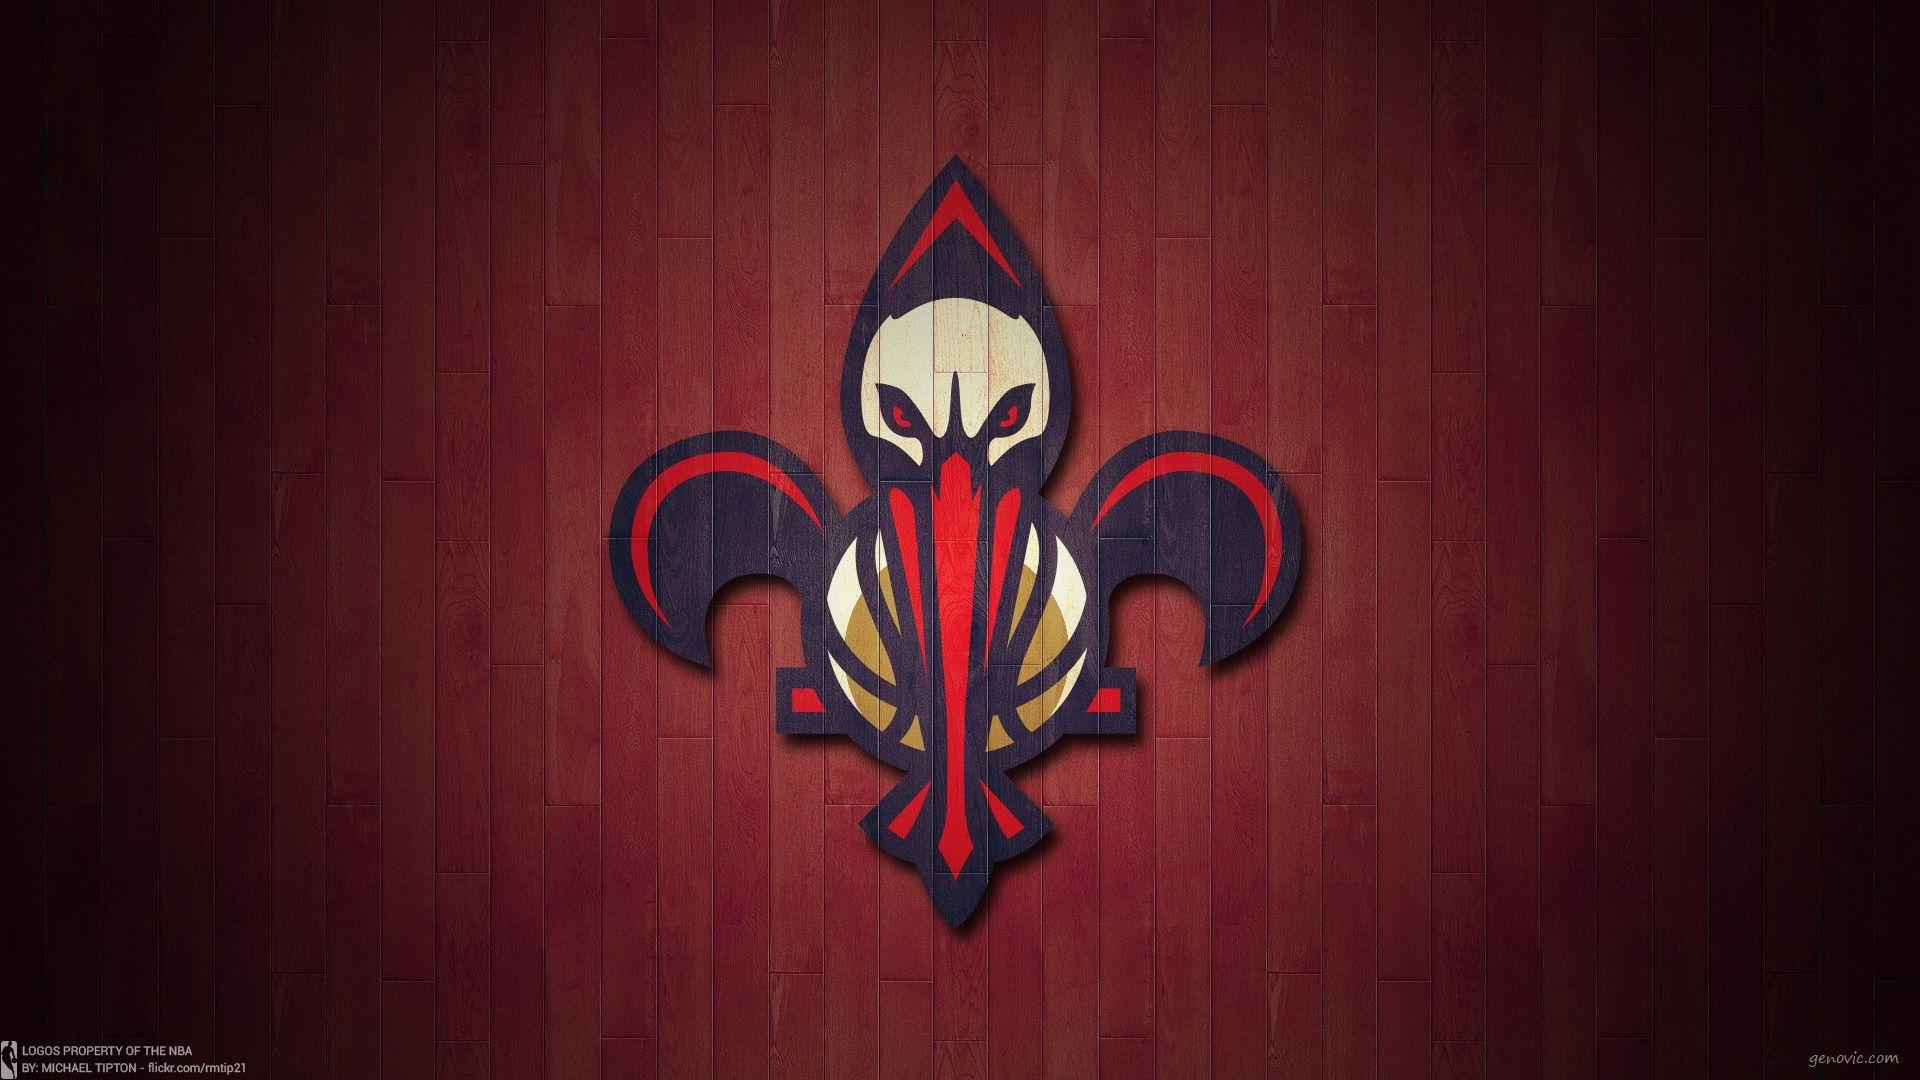 New Orleans Pelicans Wallpaper High Resolution and Quality Download